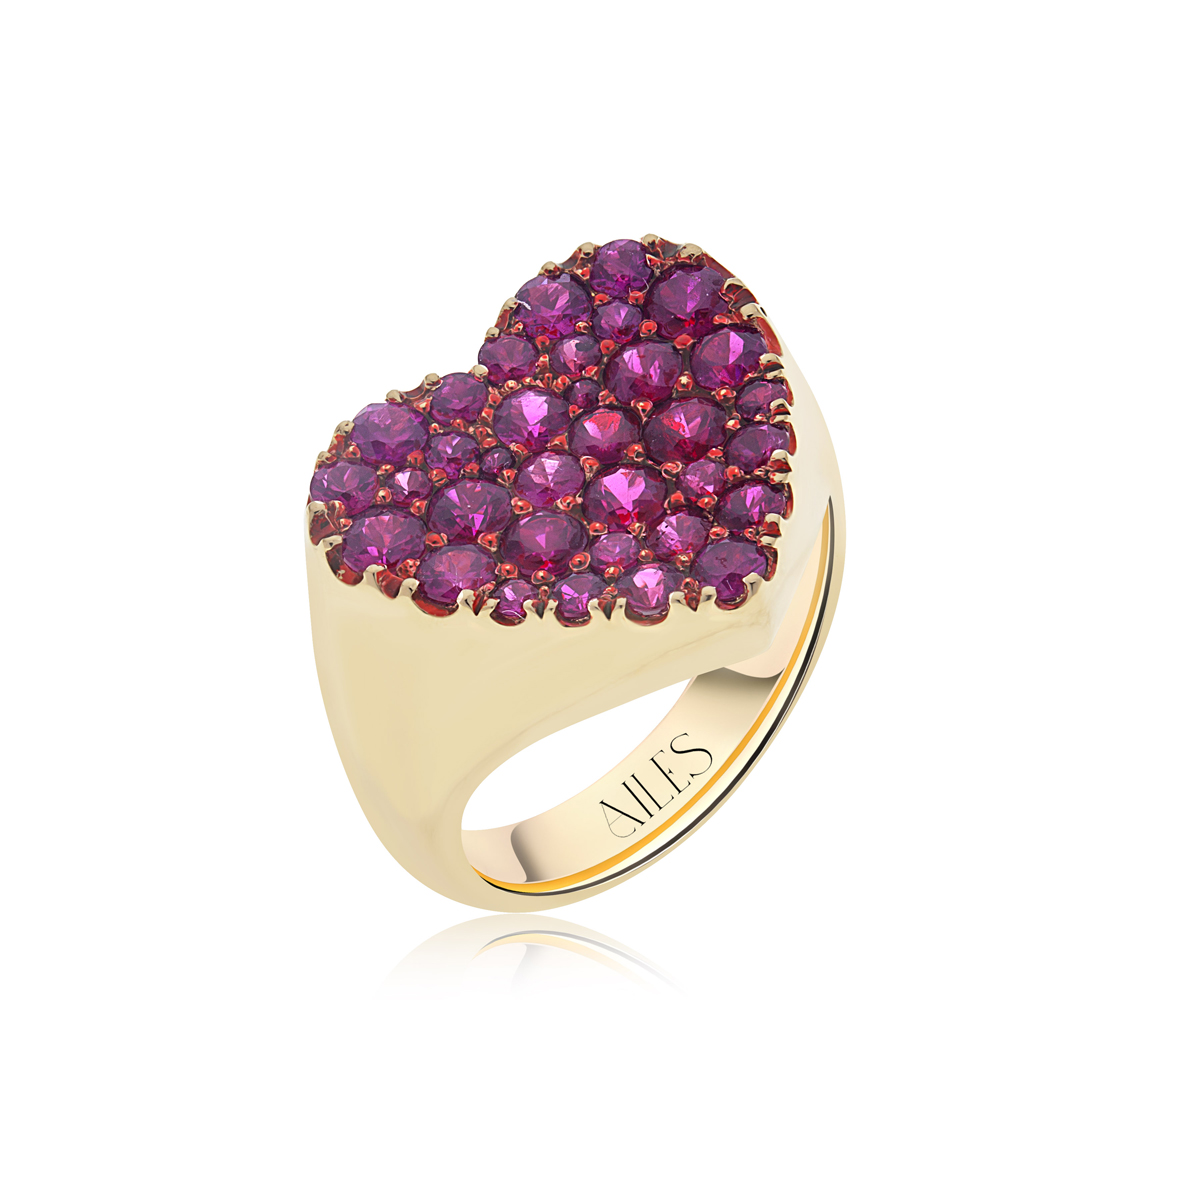 RUBY RING BY AILES